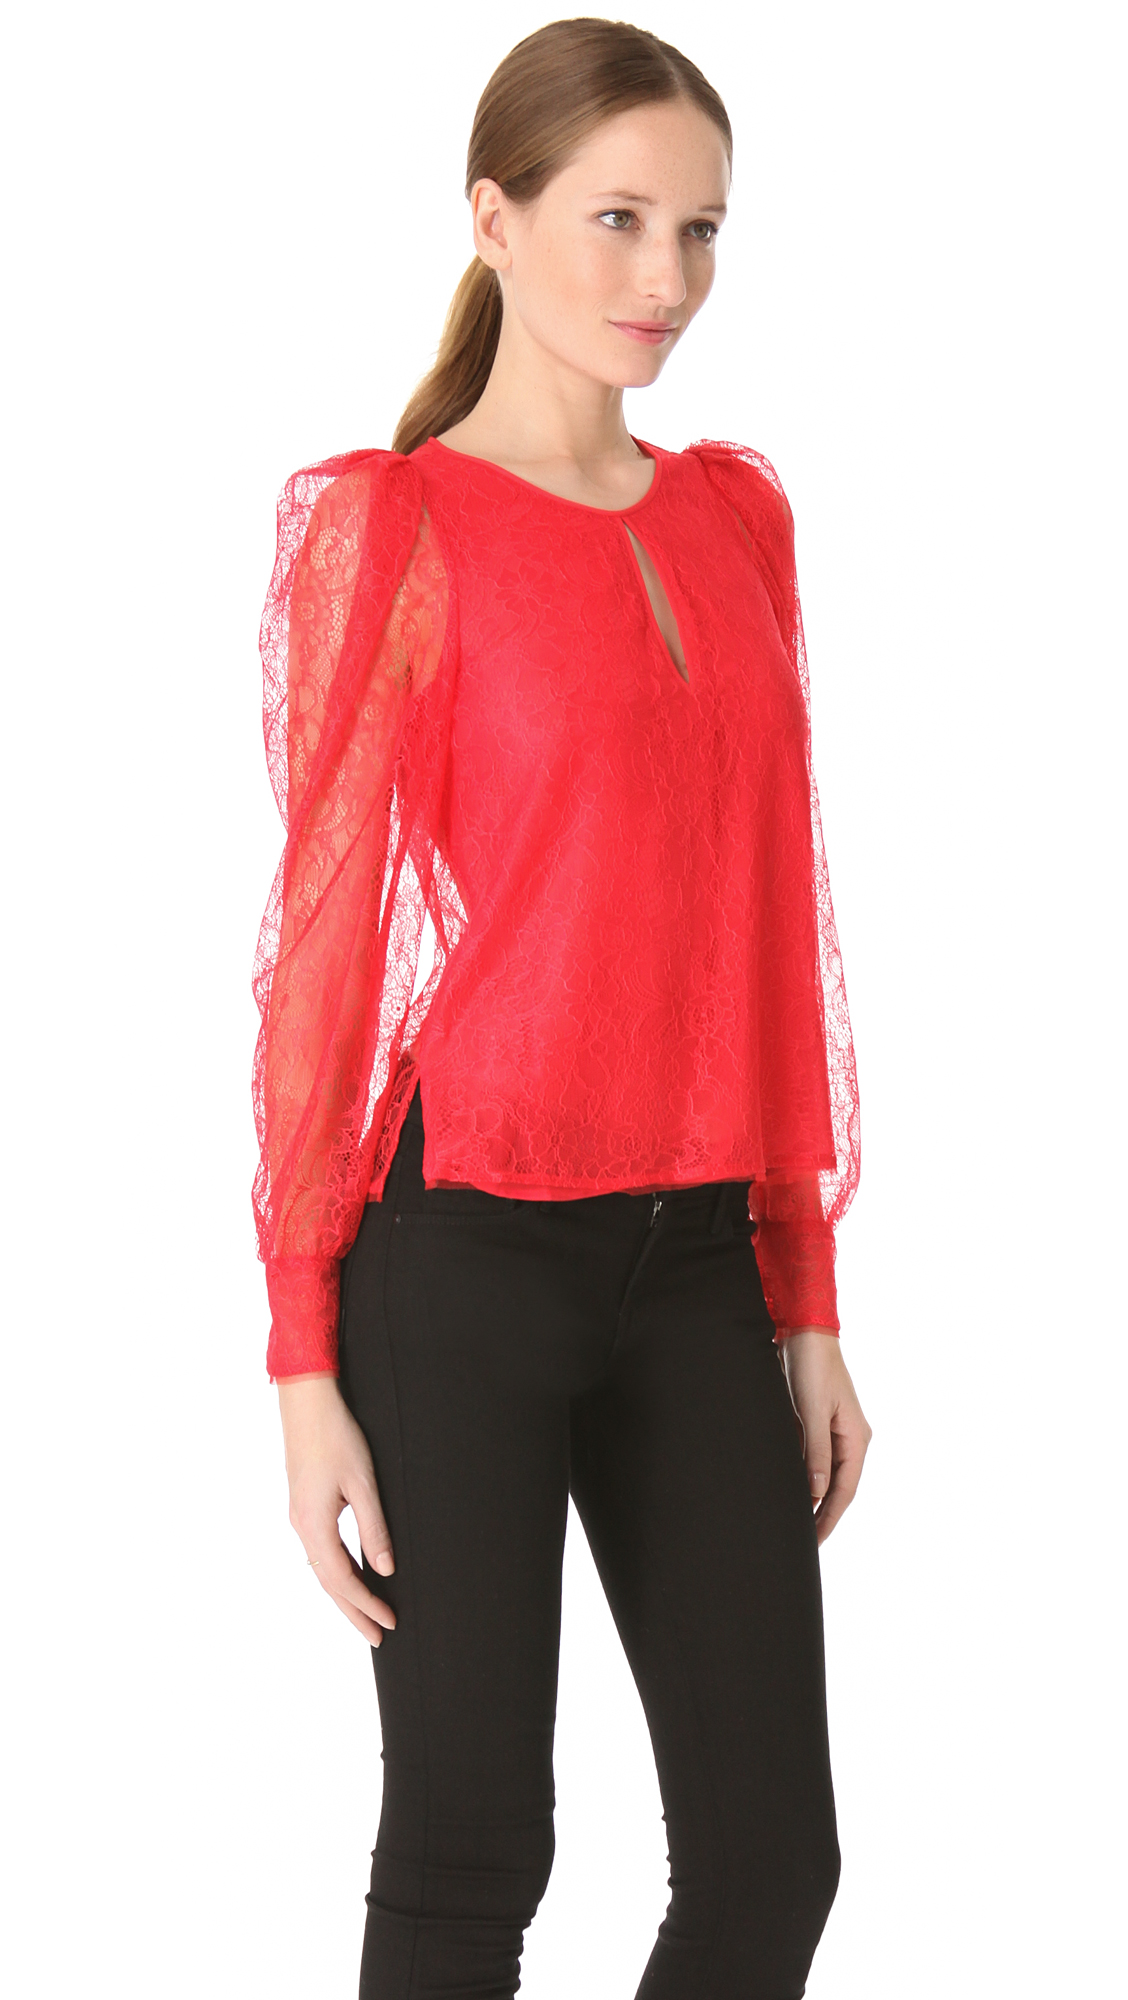 Lyst - Bcbgmaxazria Blouse Lace Blouse with Front Keyhole in Red